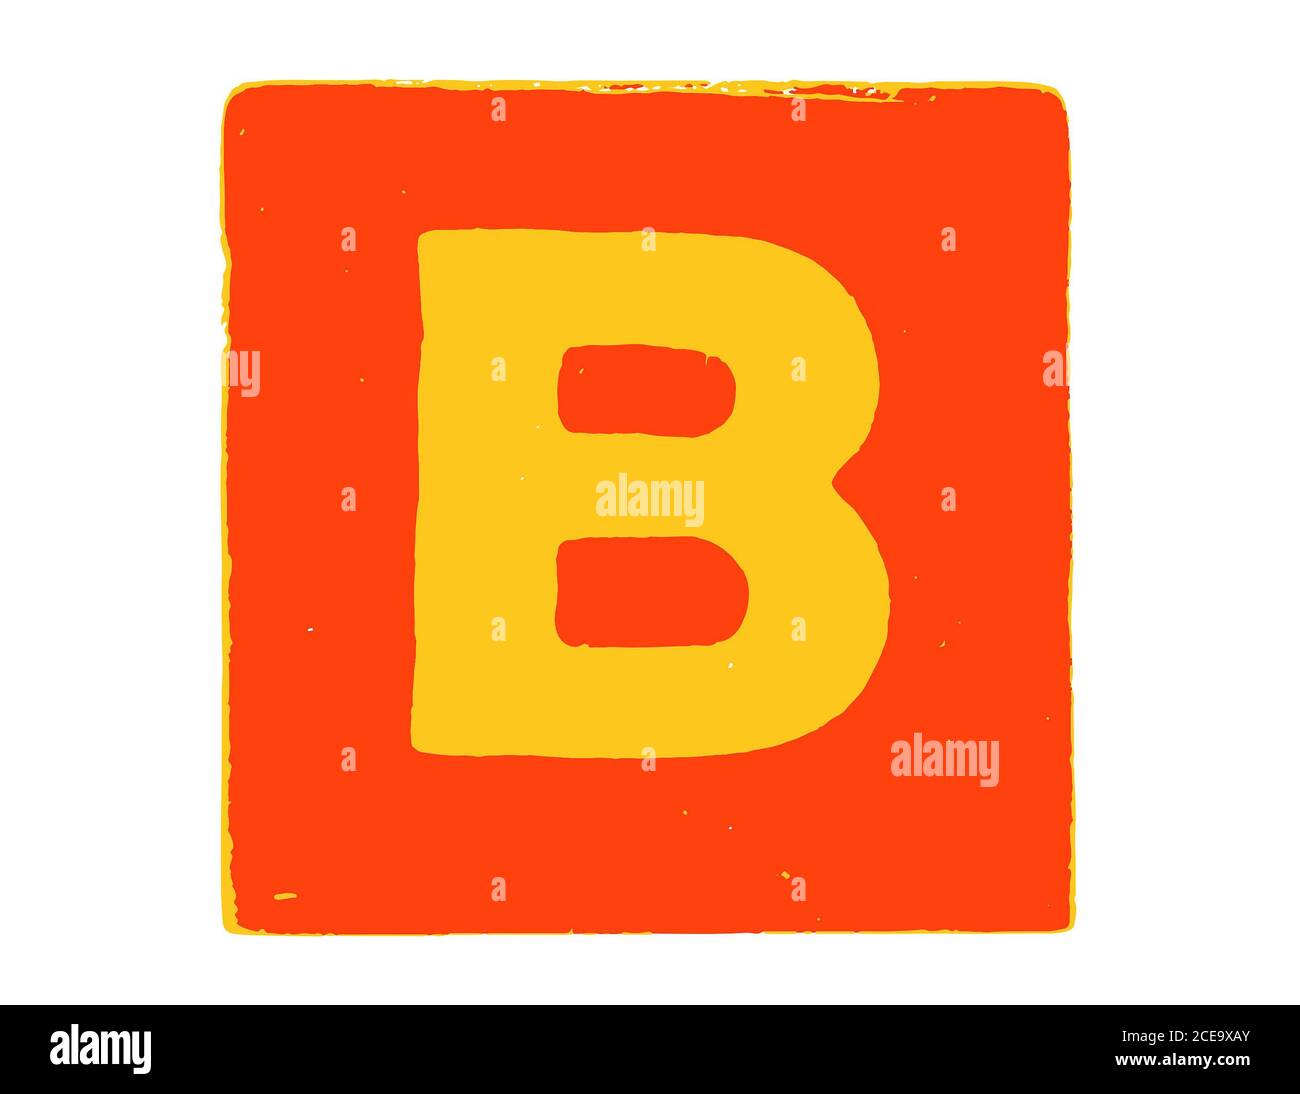 Alphabet letter cube with capital letter B on an orange background Stock Photo